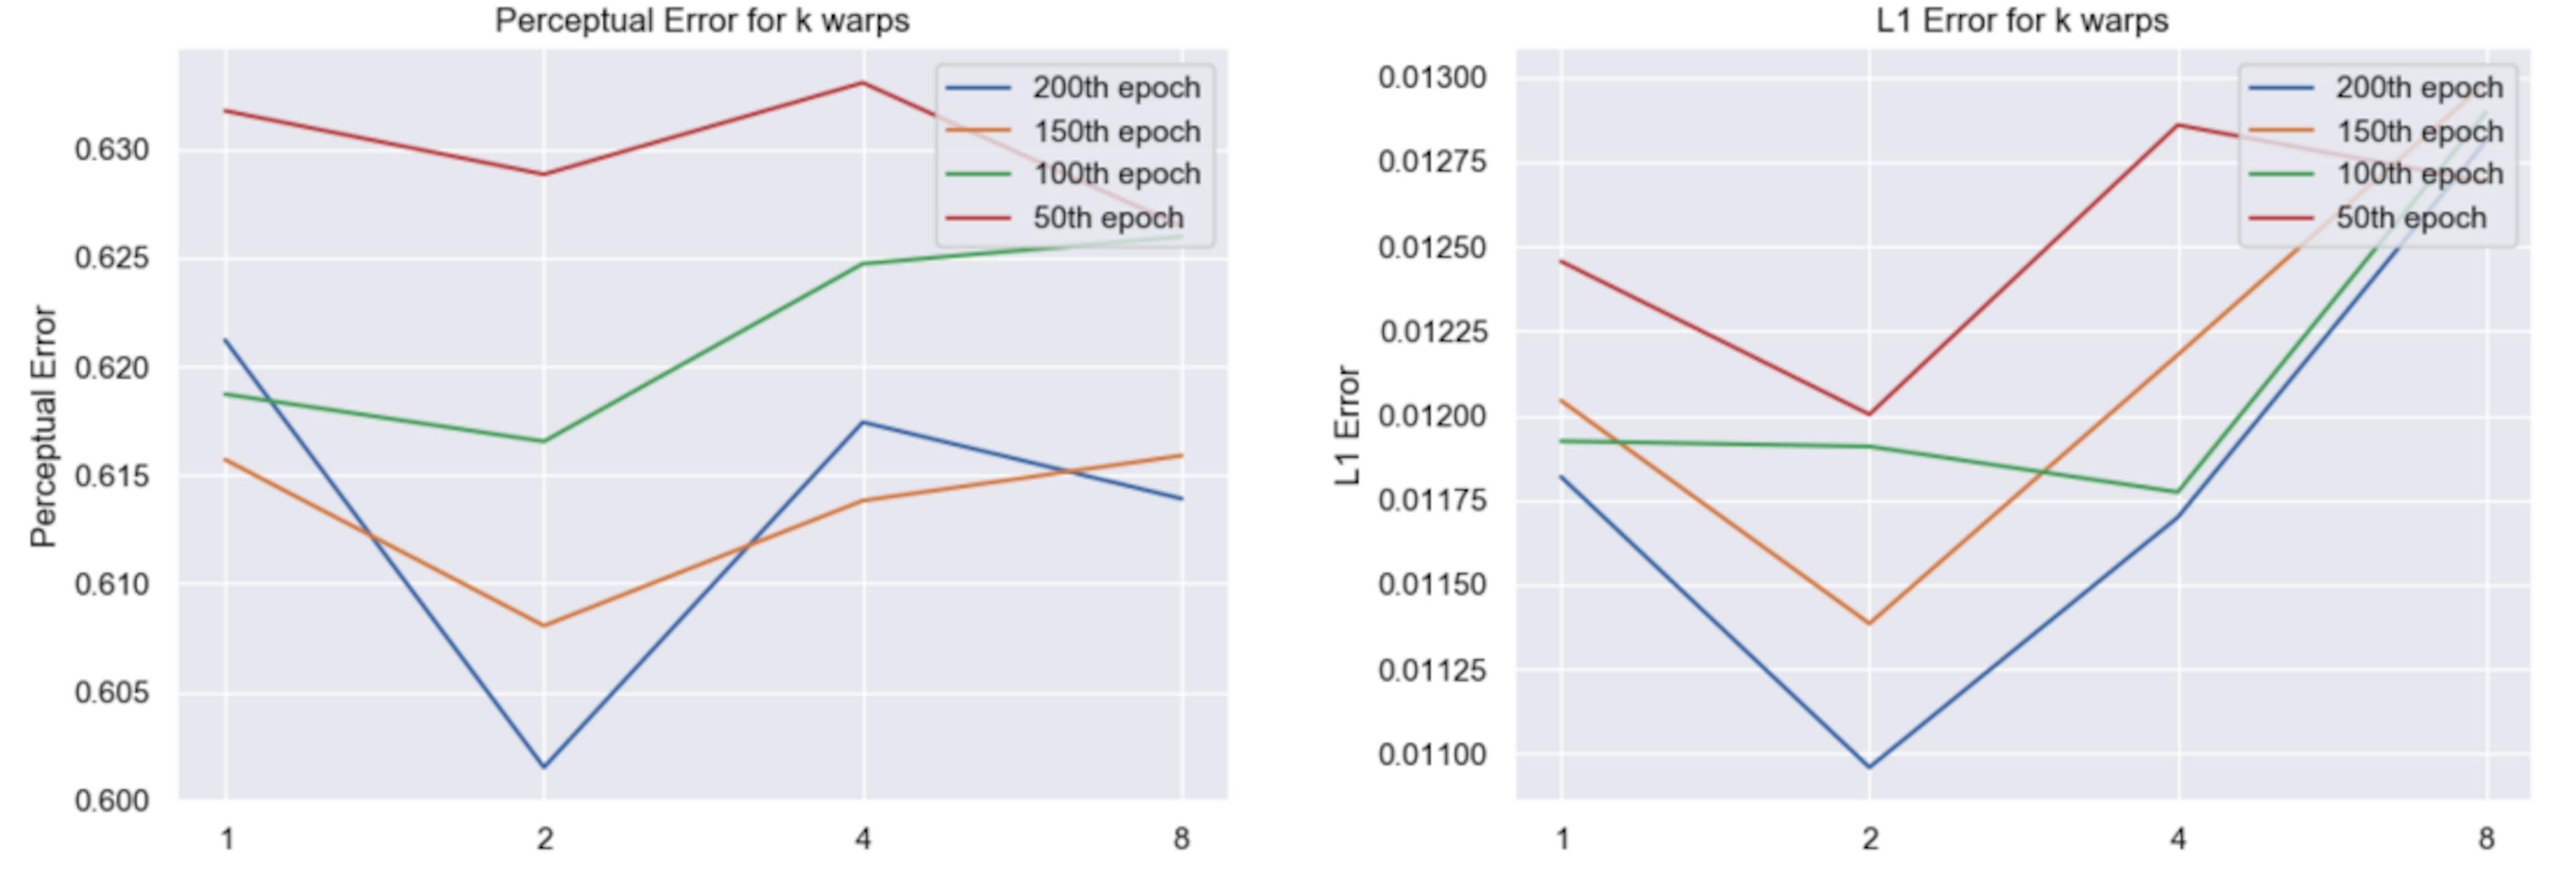 Fig. 5. The figure compares the L1 loss and perceptual loss (pre-trained VGG19) on the test set across 200 training epochs, recorded every 5 epochs. k=2 has the lowest error overall. Using a large k speeds up the training at early stage but later overfits.